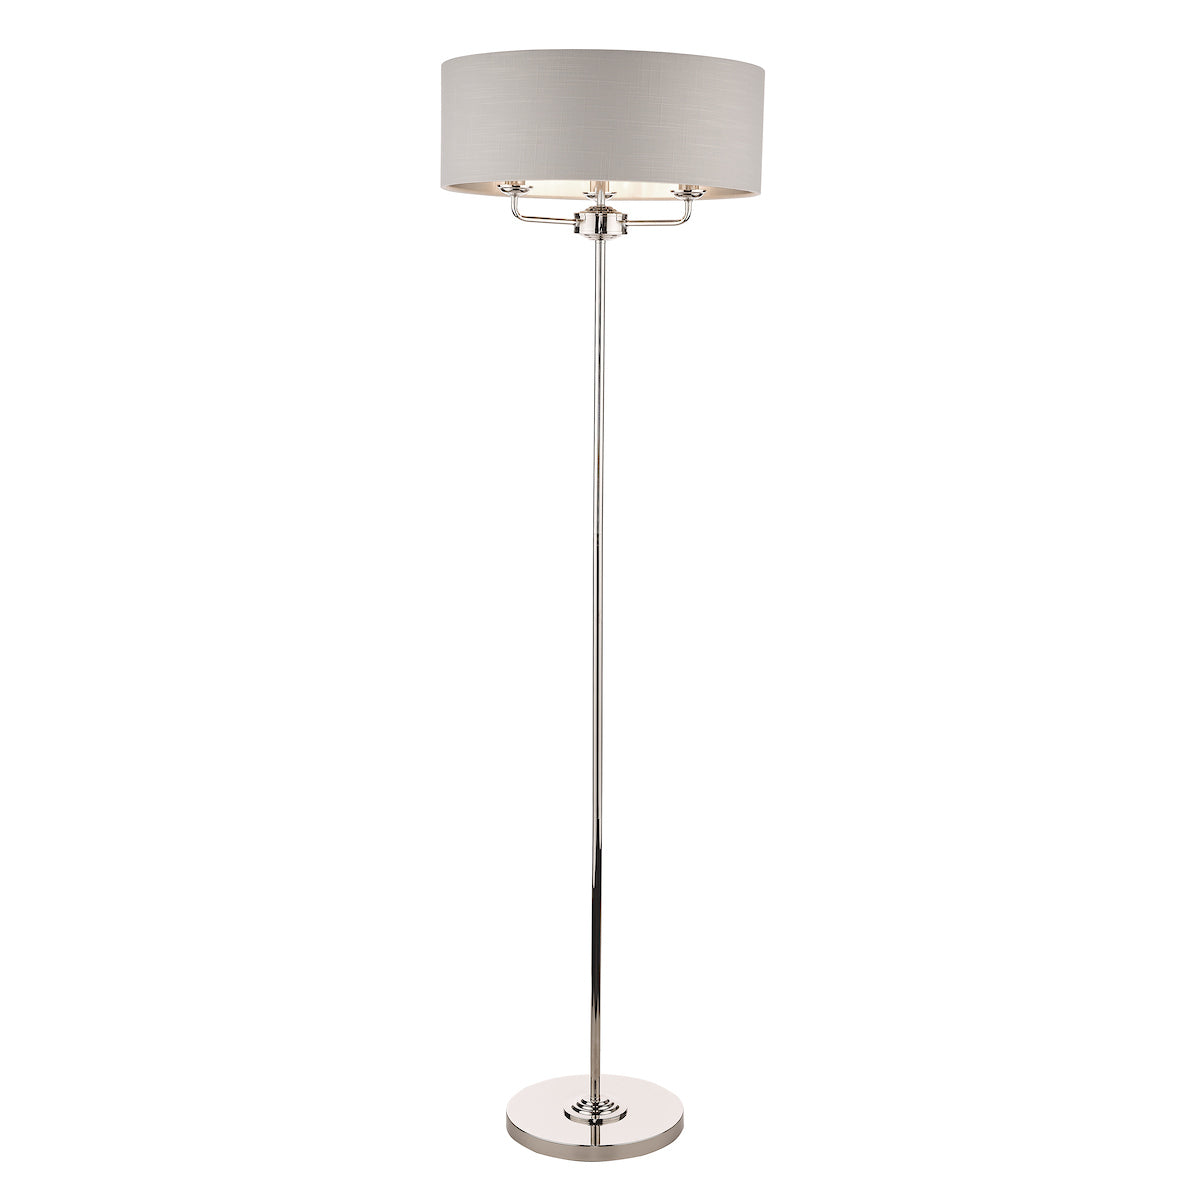 A heavy based metal floor lamp finished in reflective polished nickel, with a silver grey shallow drum shade, that surrounds the top bulb holder which frame is partially visible peeking beneath the shade, the light has three bulbs on a frame with arms inside the shade so it makes it a very bright light if required.